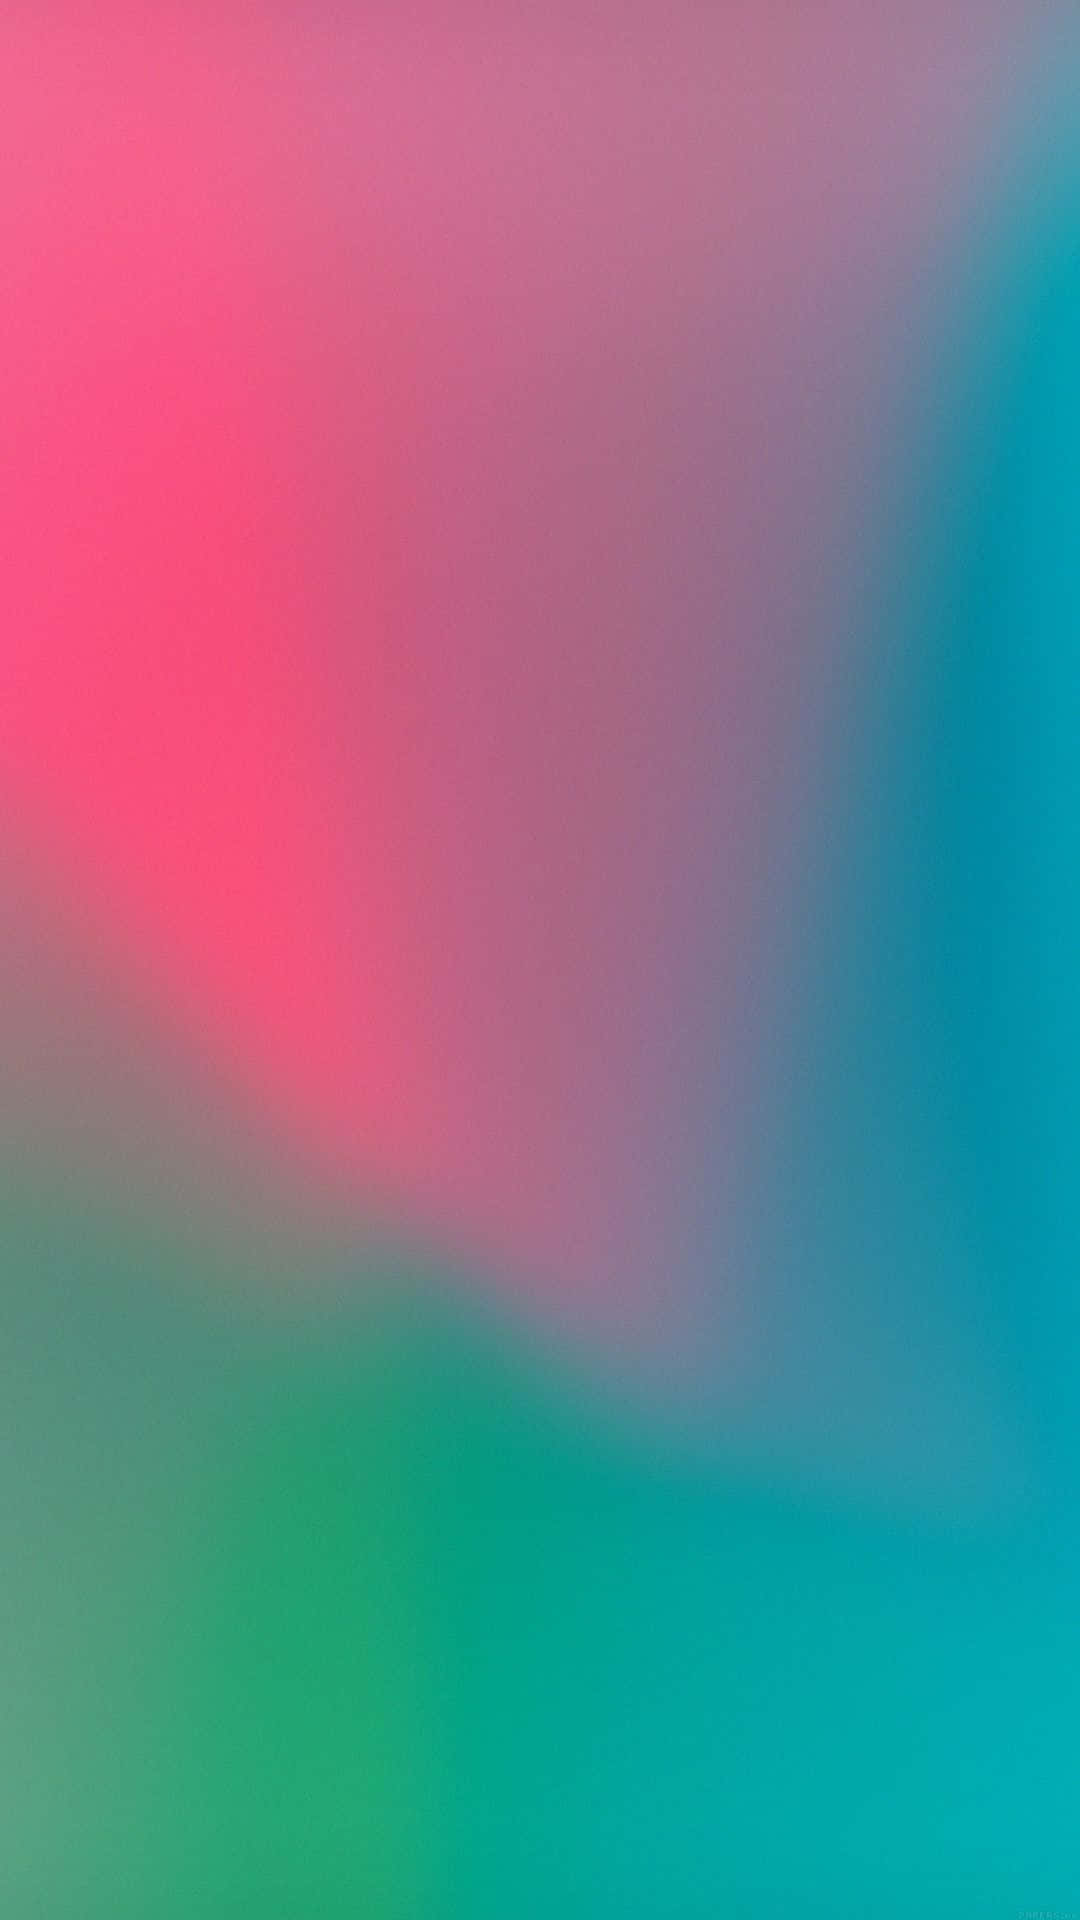 A Blurred Background With A Pink, Blue, And Green Color